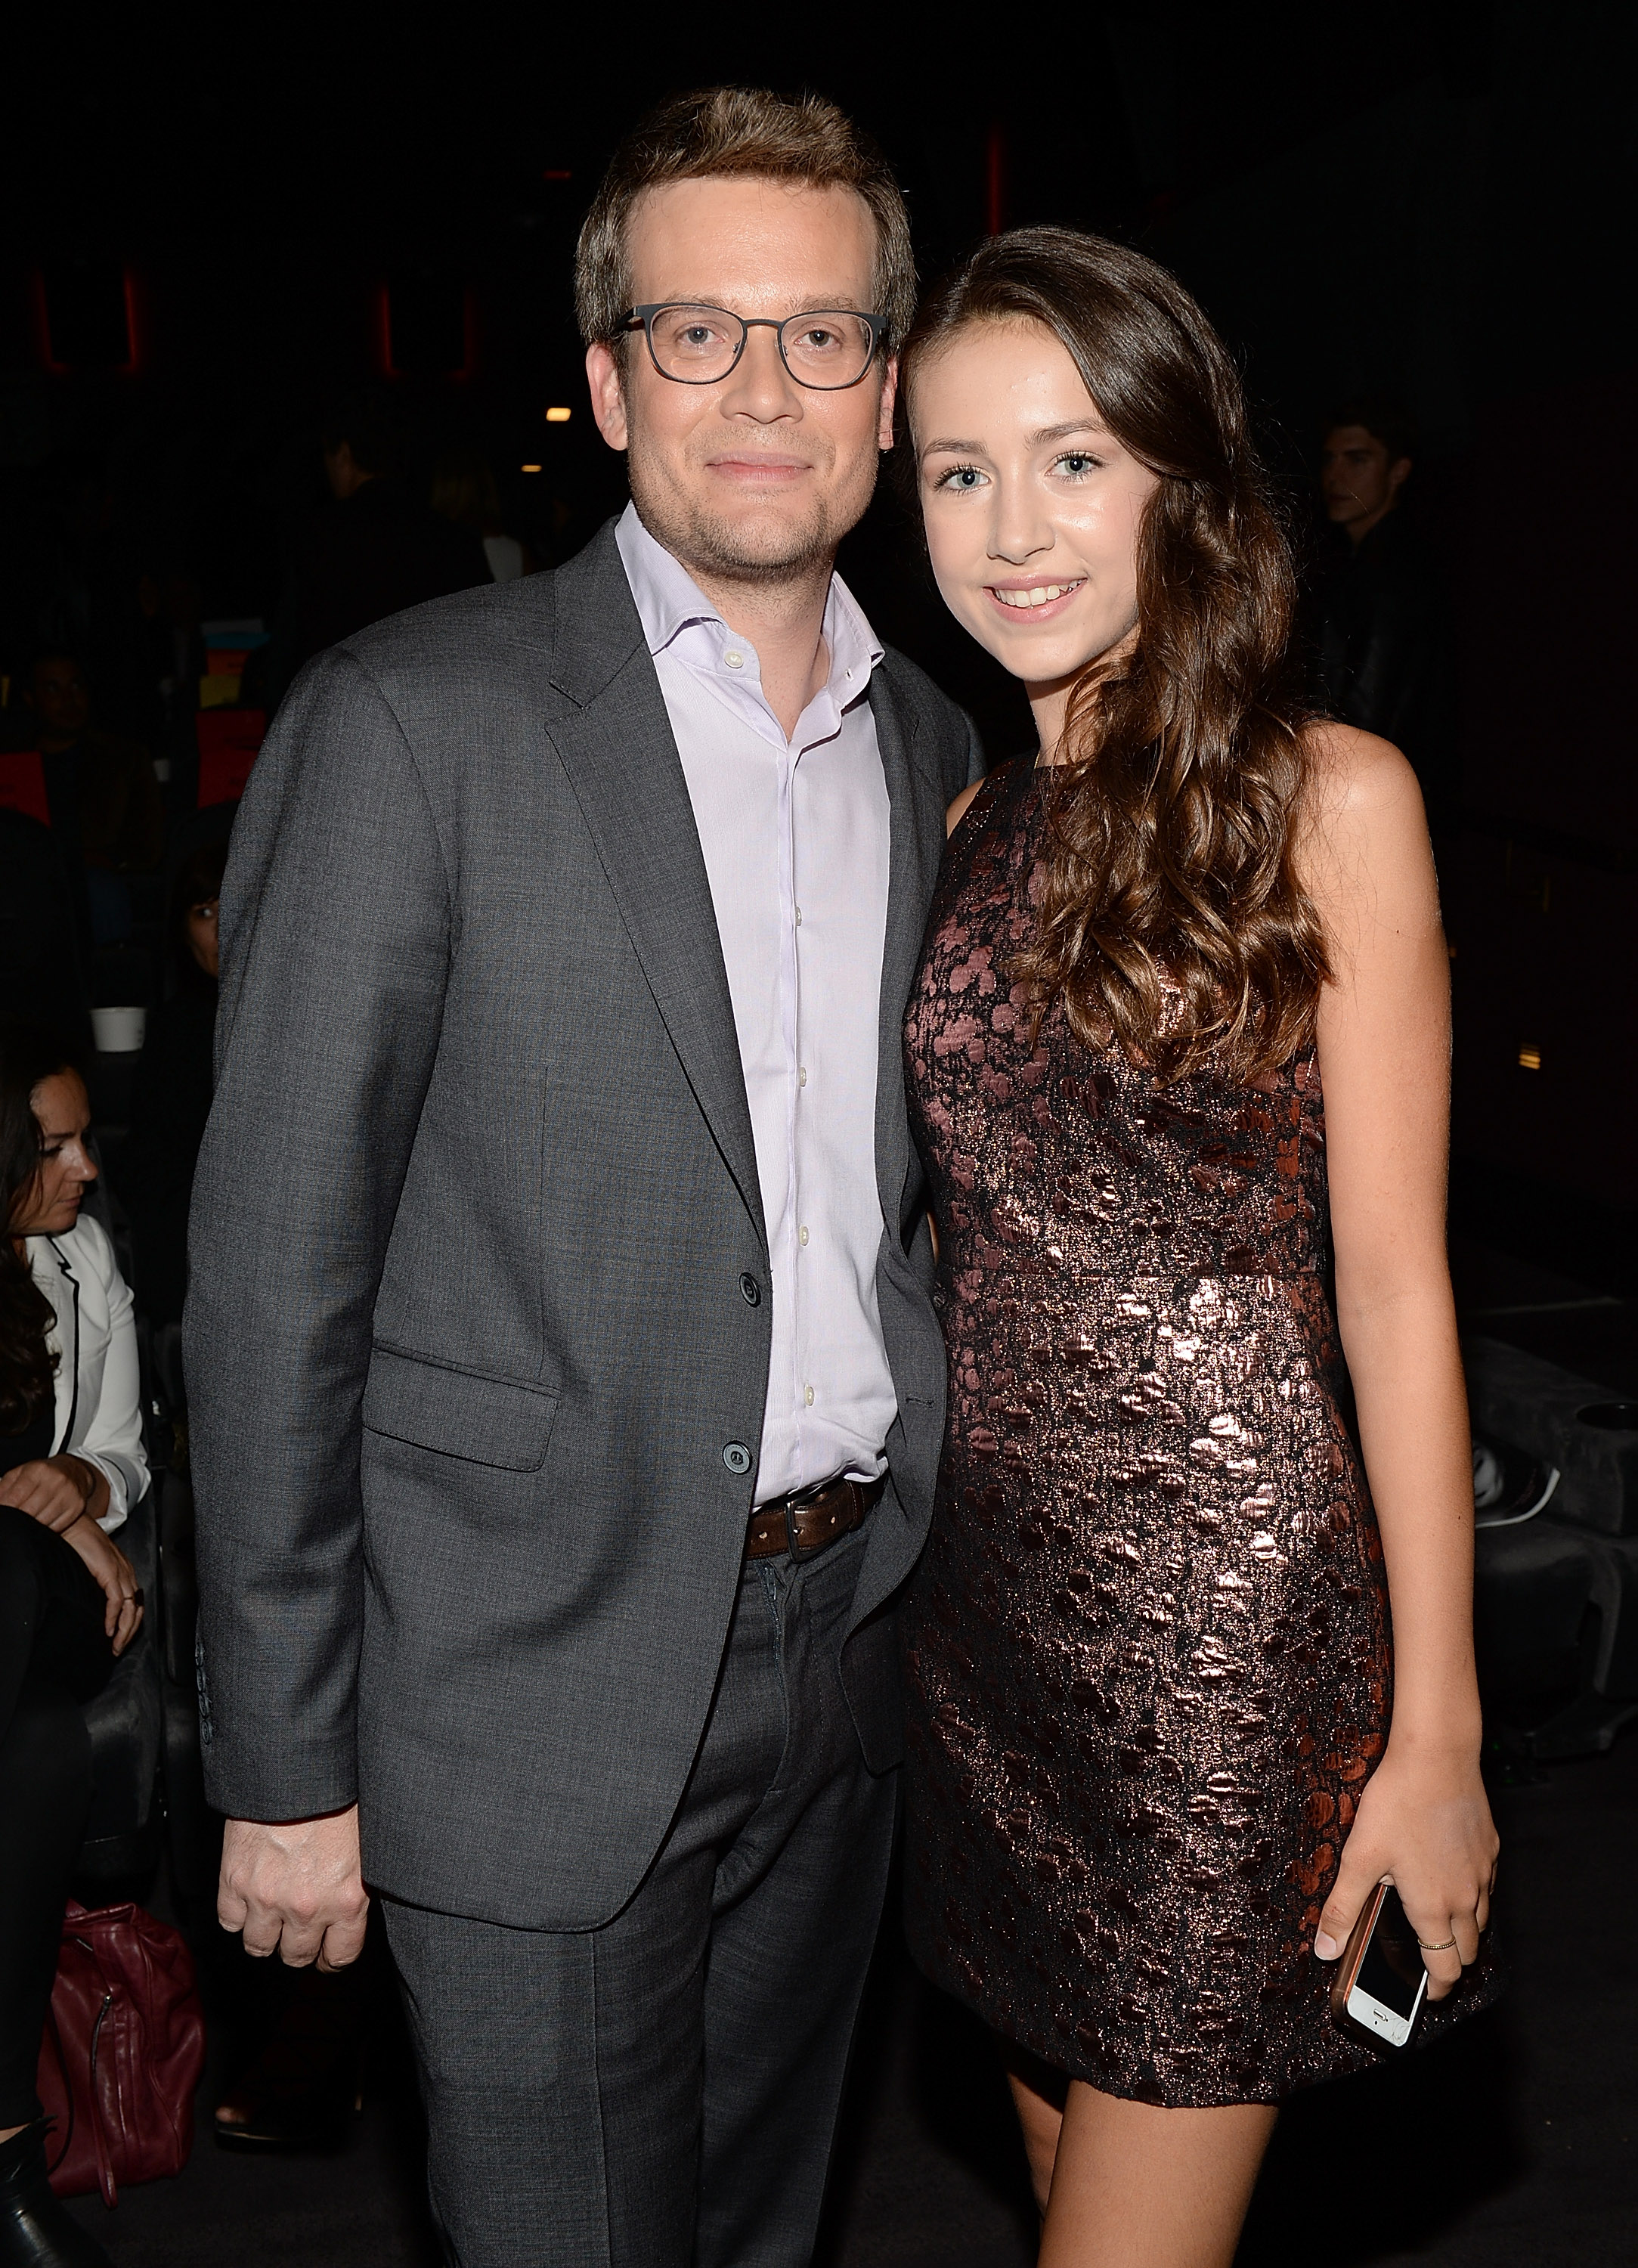 Author, John Green & Emma Fuhrmann at an event for Paper Towns